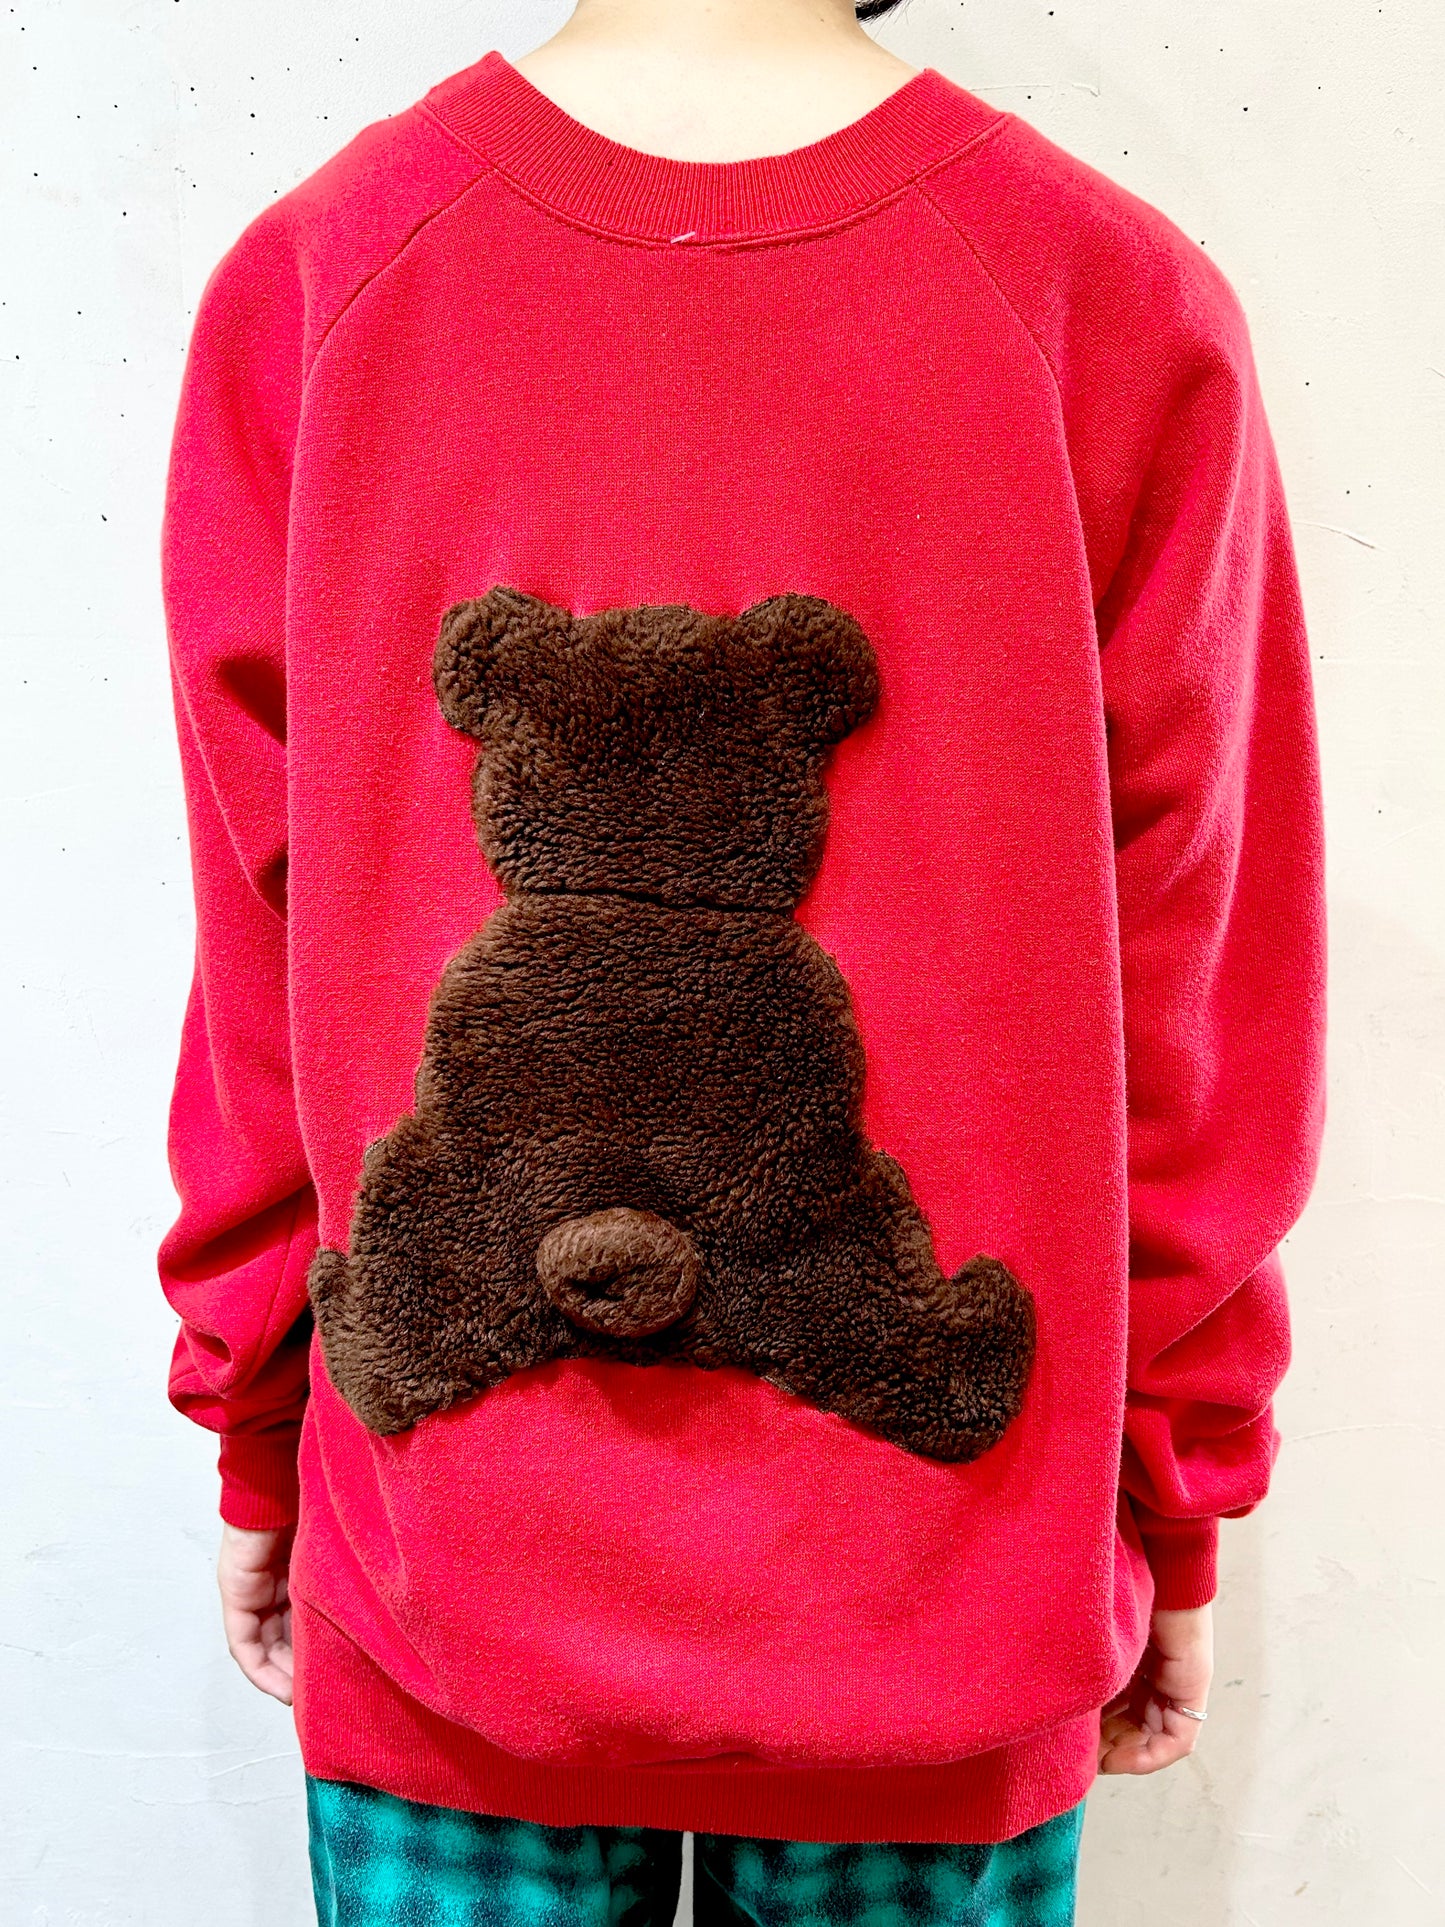 Vintage Teddy Bear Patch Sweat MADE IN USA [I25060]